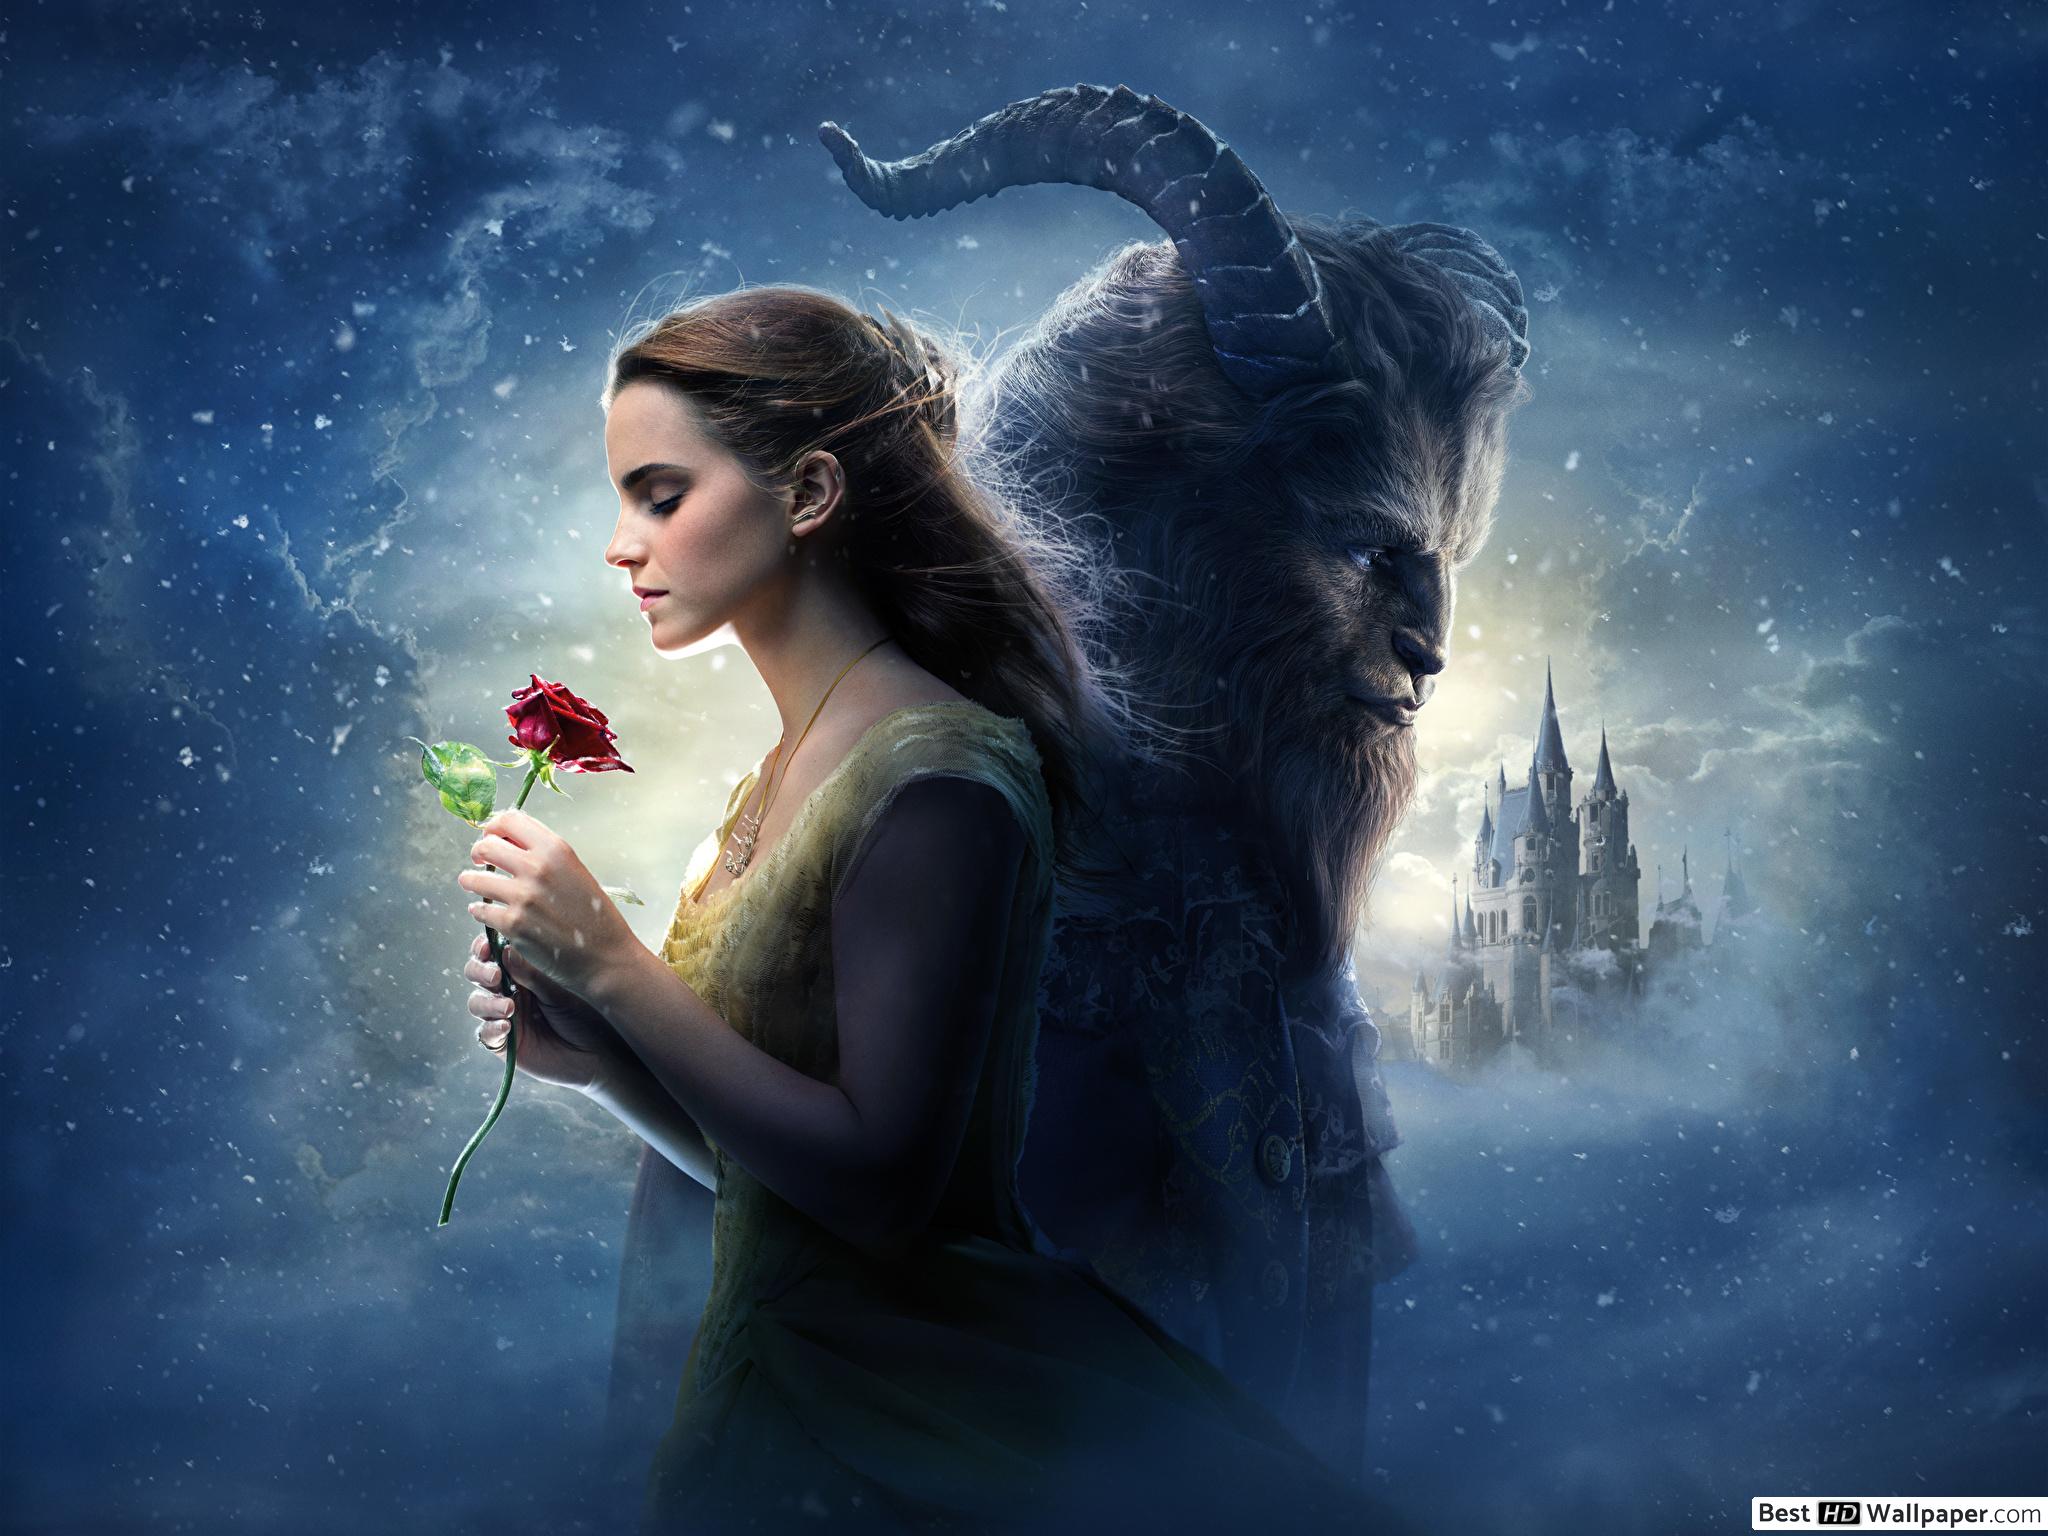 Beauty And The Beast Poster Textless - HD Wallpaper 